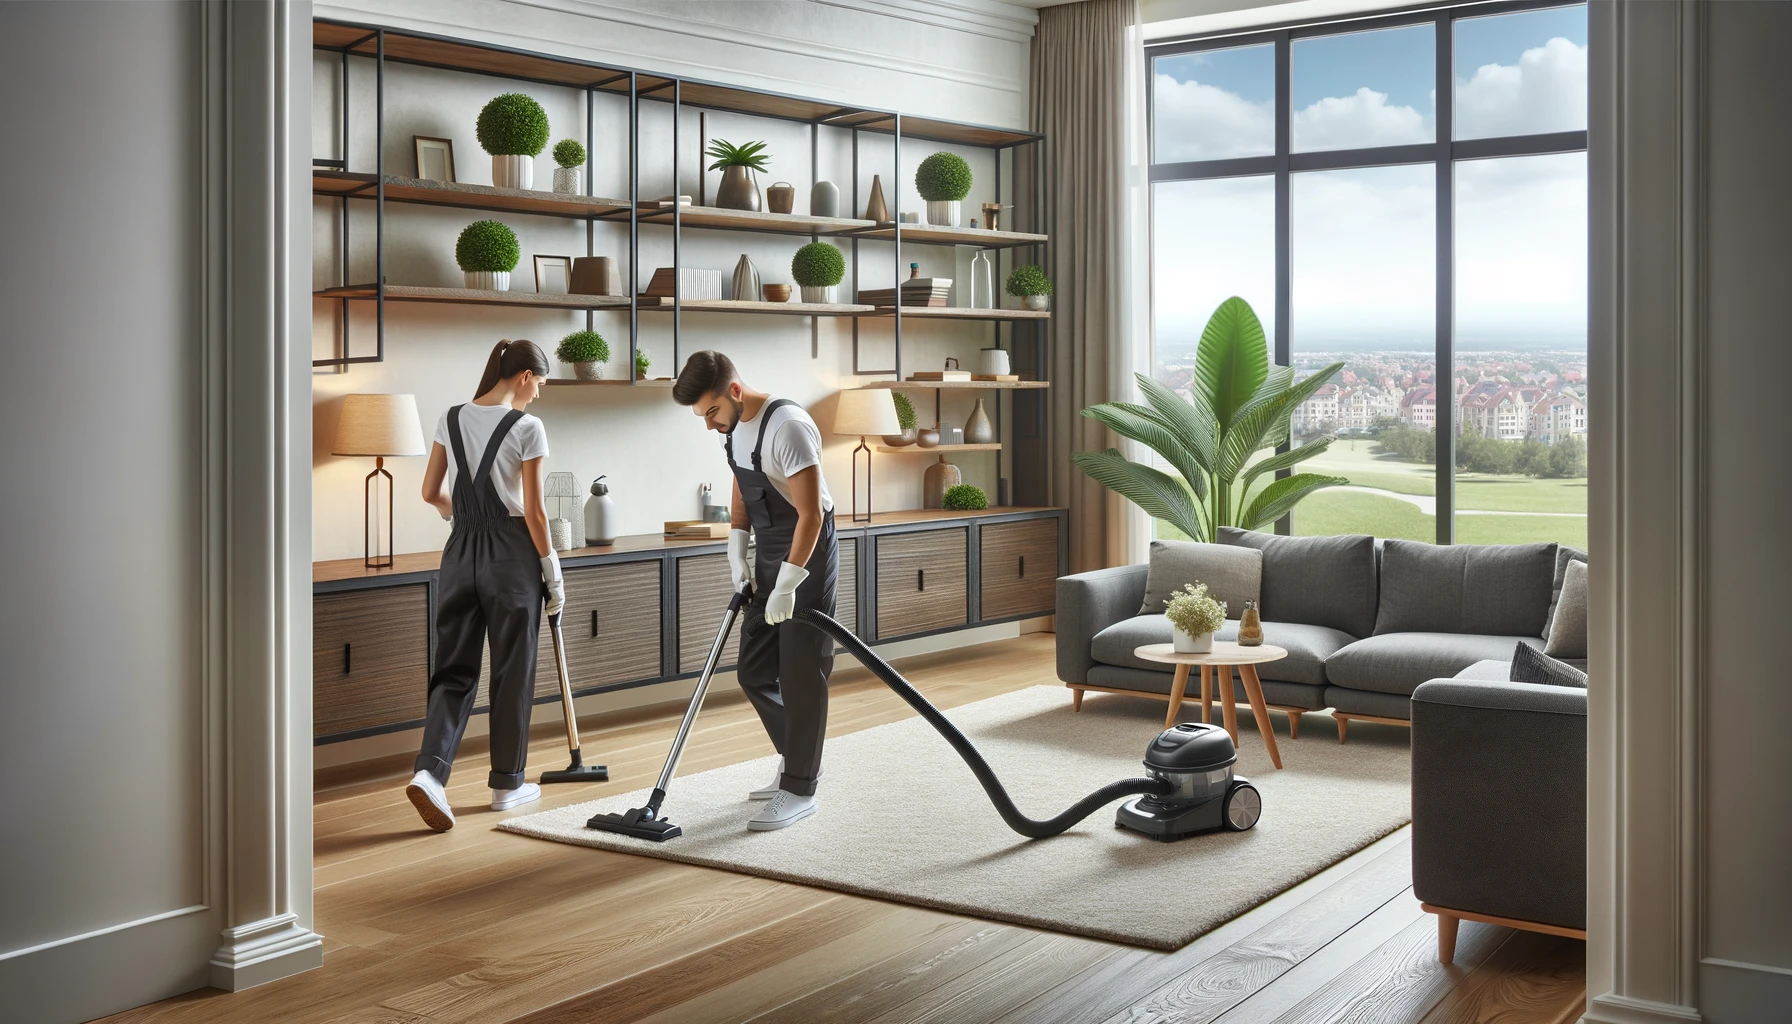 A wide image of a professional house cleaning service in action inside a modern living room